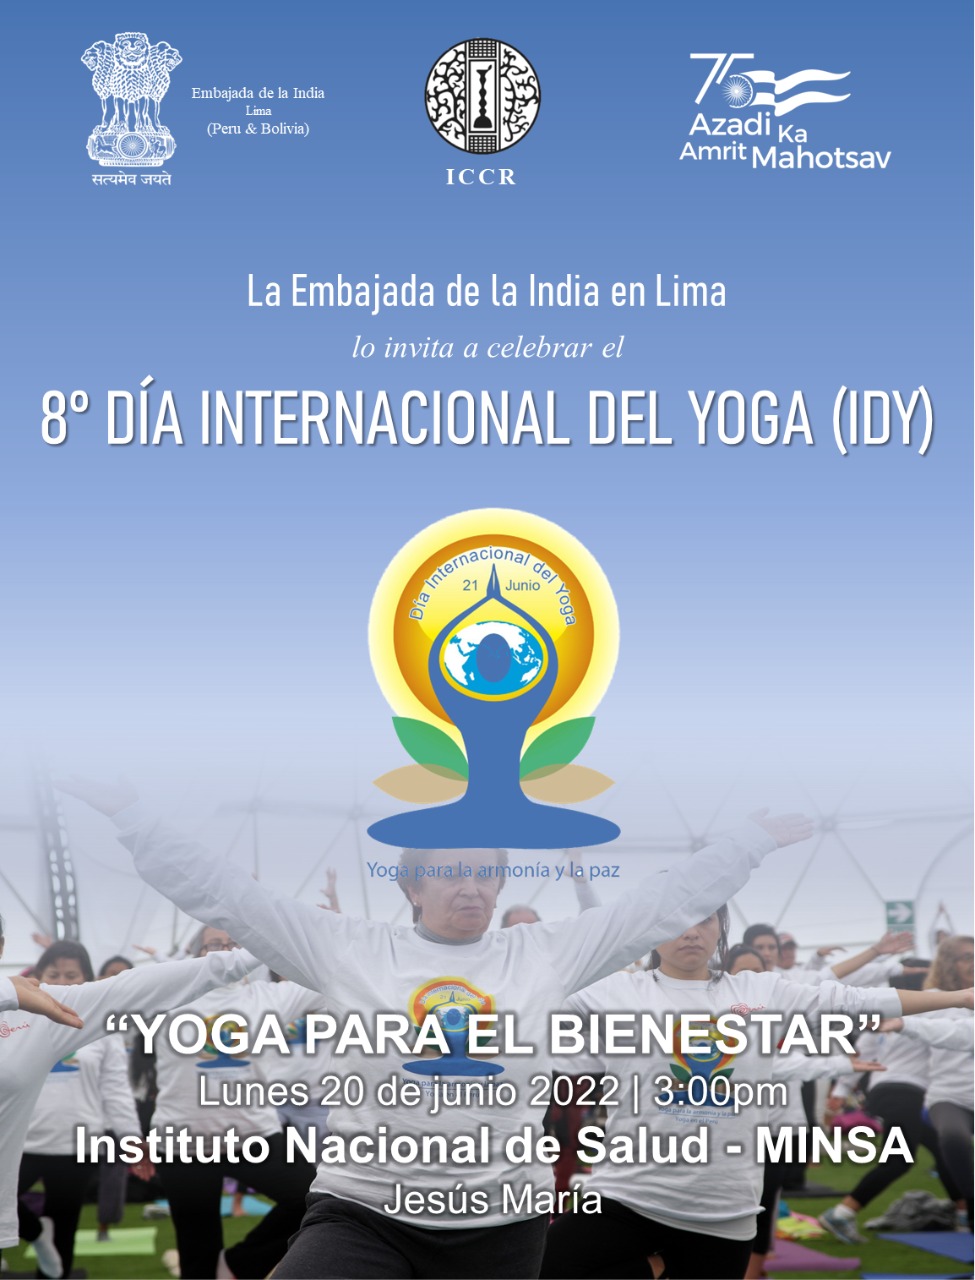 Celebration of 8th International Day of Yoga 2022 - Event in collboration with the Ministry of Health (Minsa)